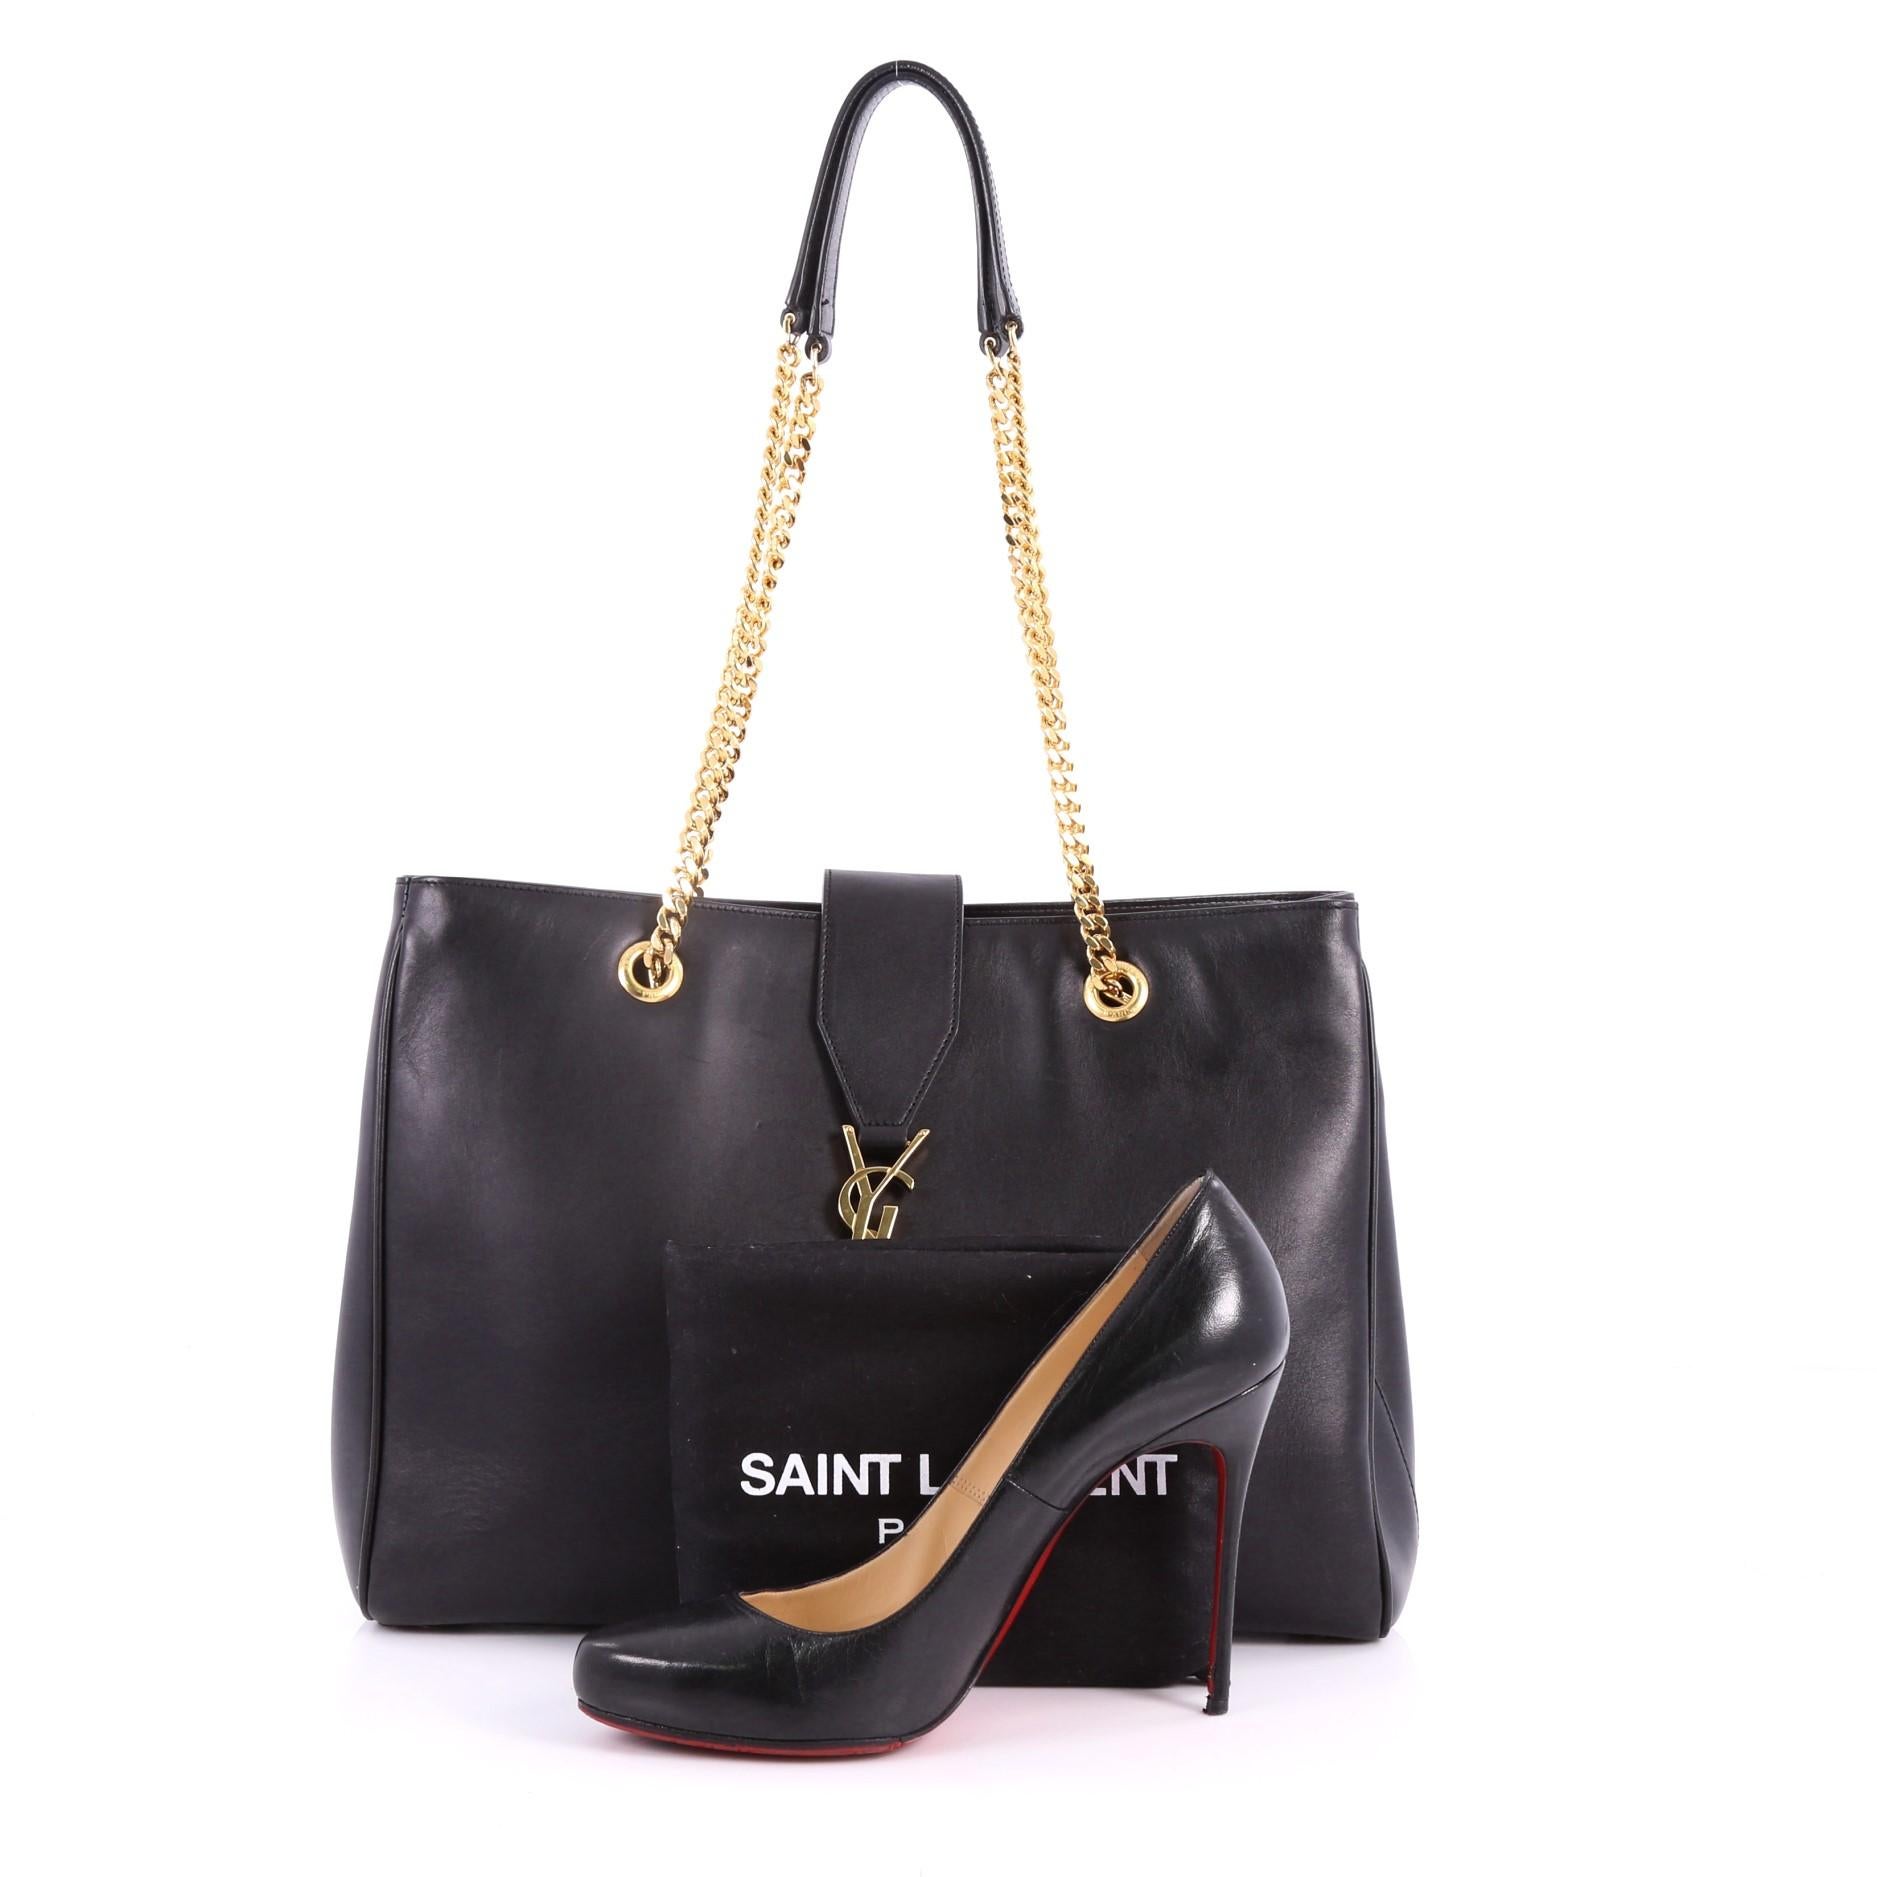 This authentic Saint Laurent Classic Monogram Shopper Leather Large is stylish and elegant in design perfect for the modern fashionista. Crafted from black leather, this bag features dual gold-tone chain straps, signature interlocking gold-tone YSL